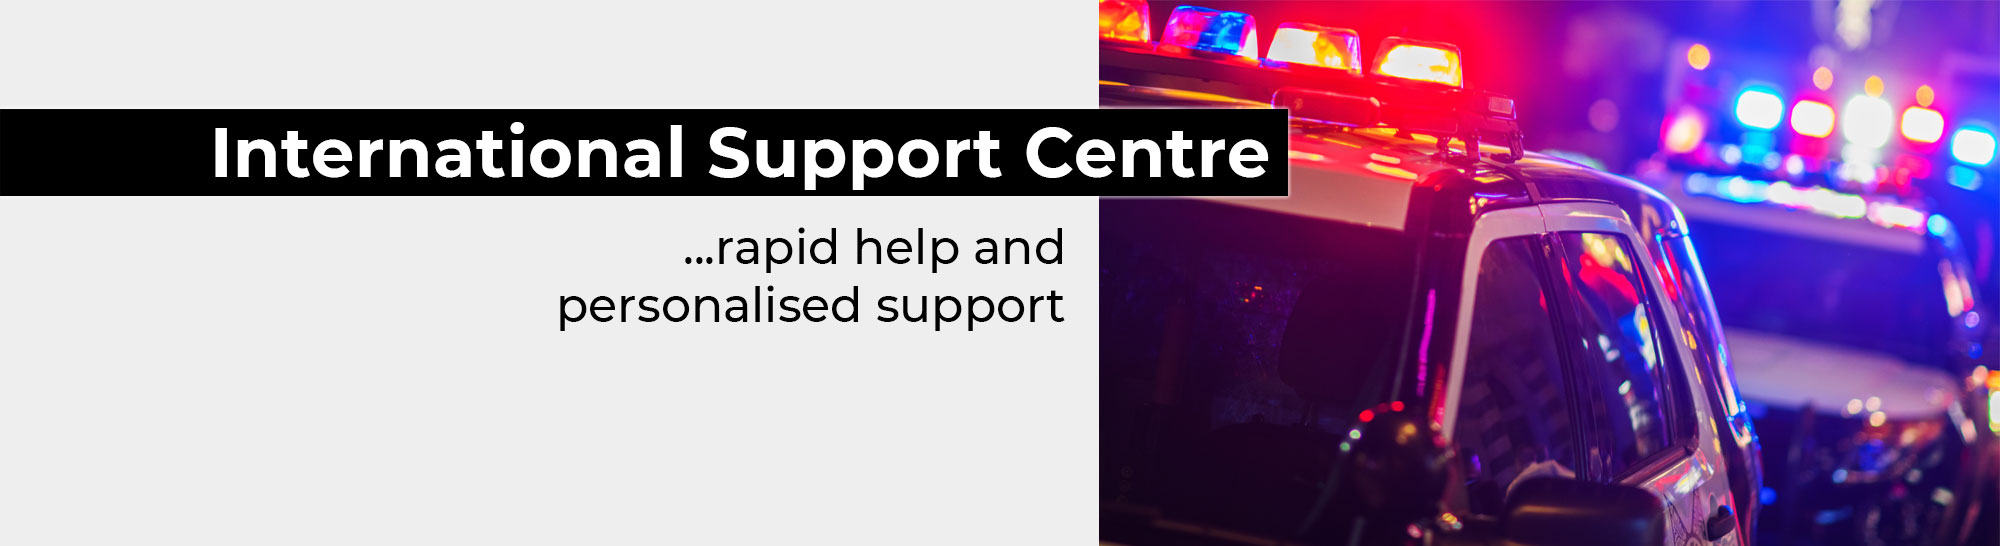 Support Centre